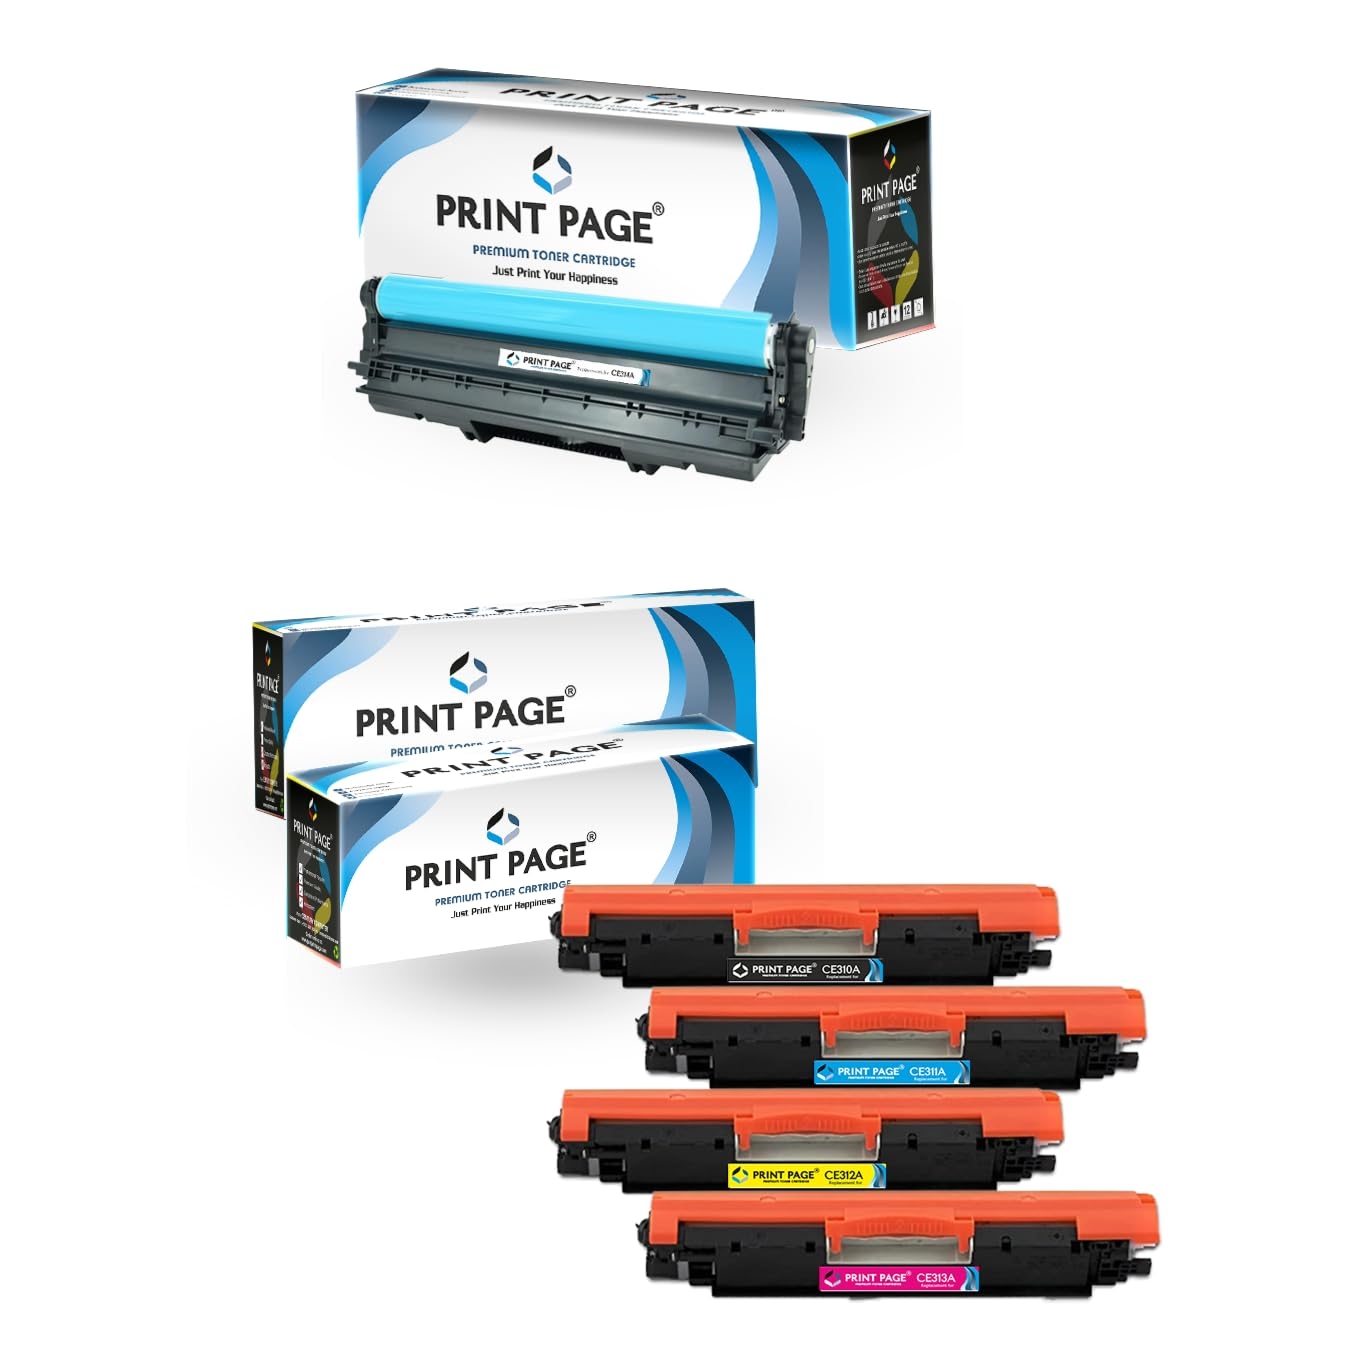 Print Page CE310A/11A/12A/13A Toner Cartridge + CE314A Imaging Drum Unit Combo Pack for HP 126A for HP Color Laserjet CP1025, CP1025NW, M175A, M175NW, M275MFP